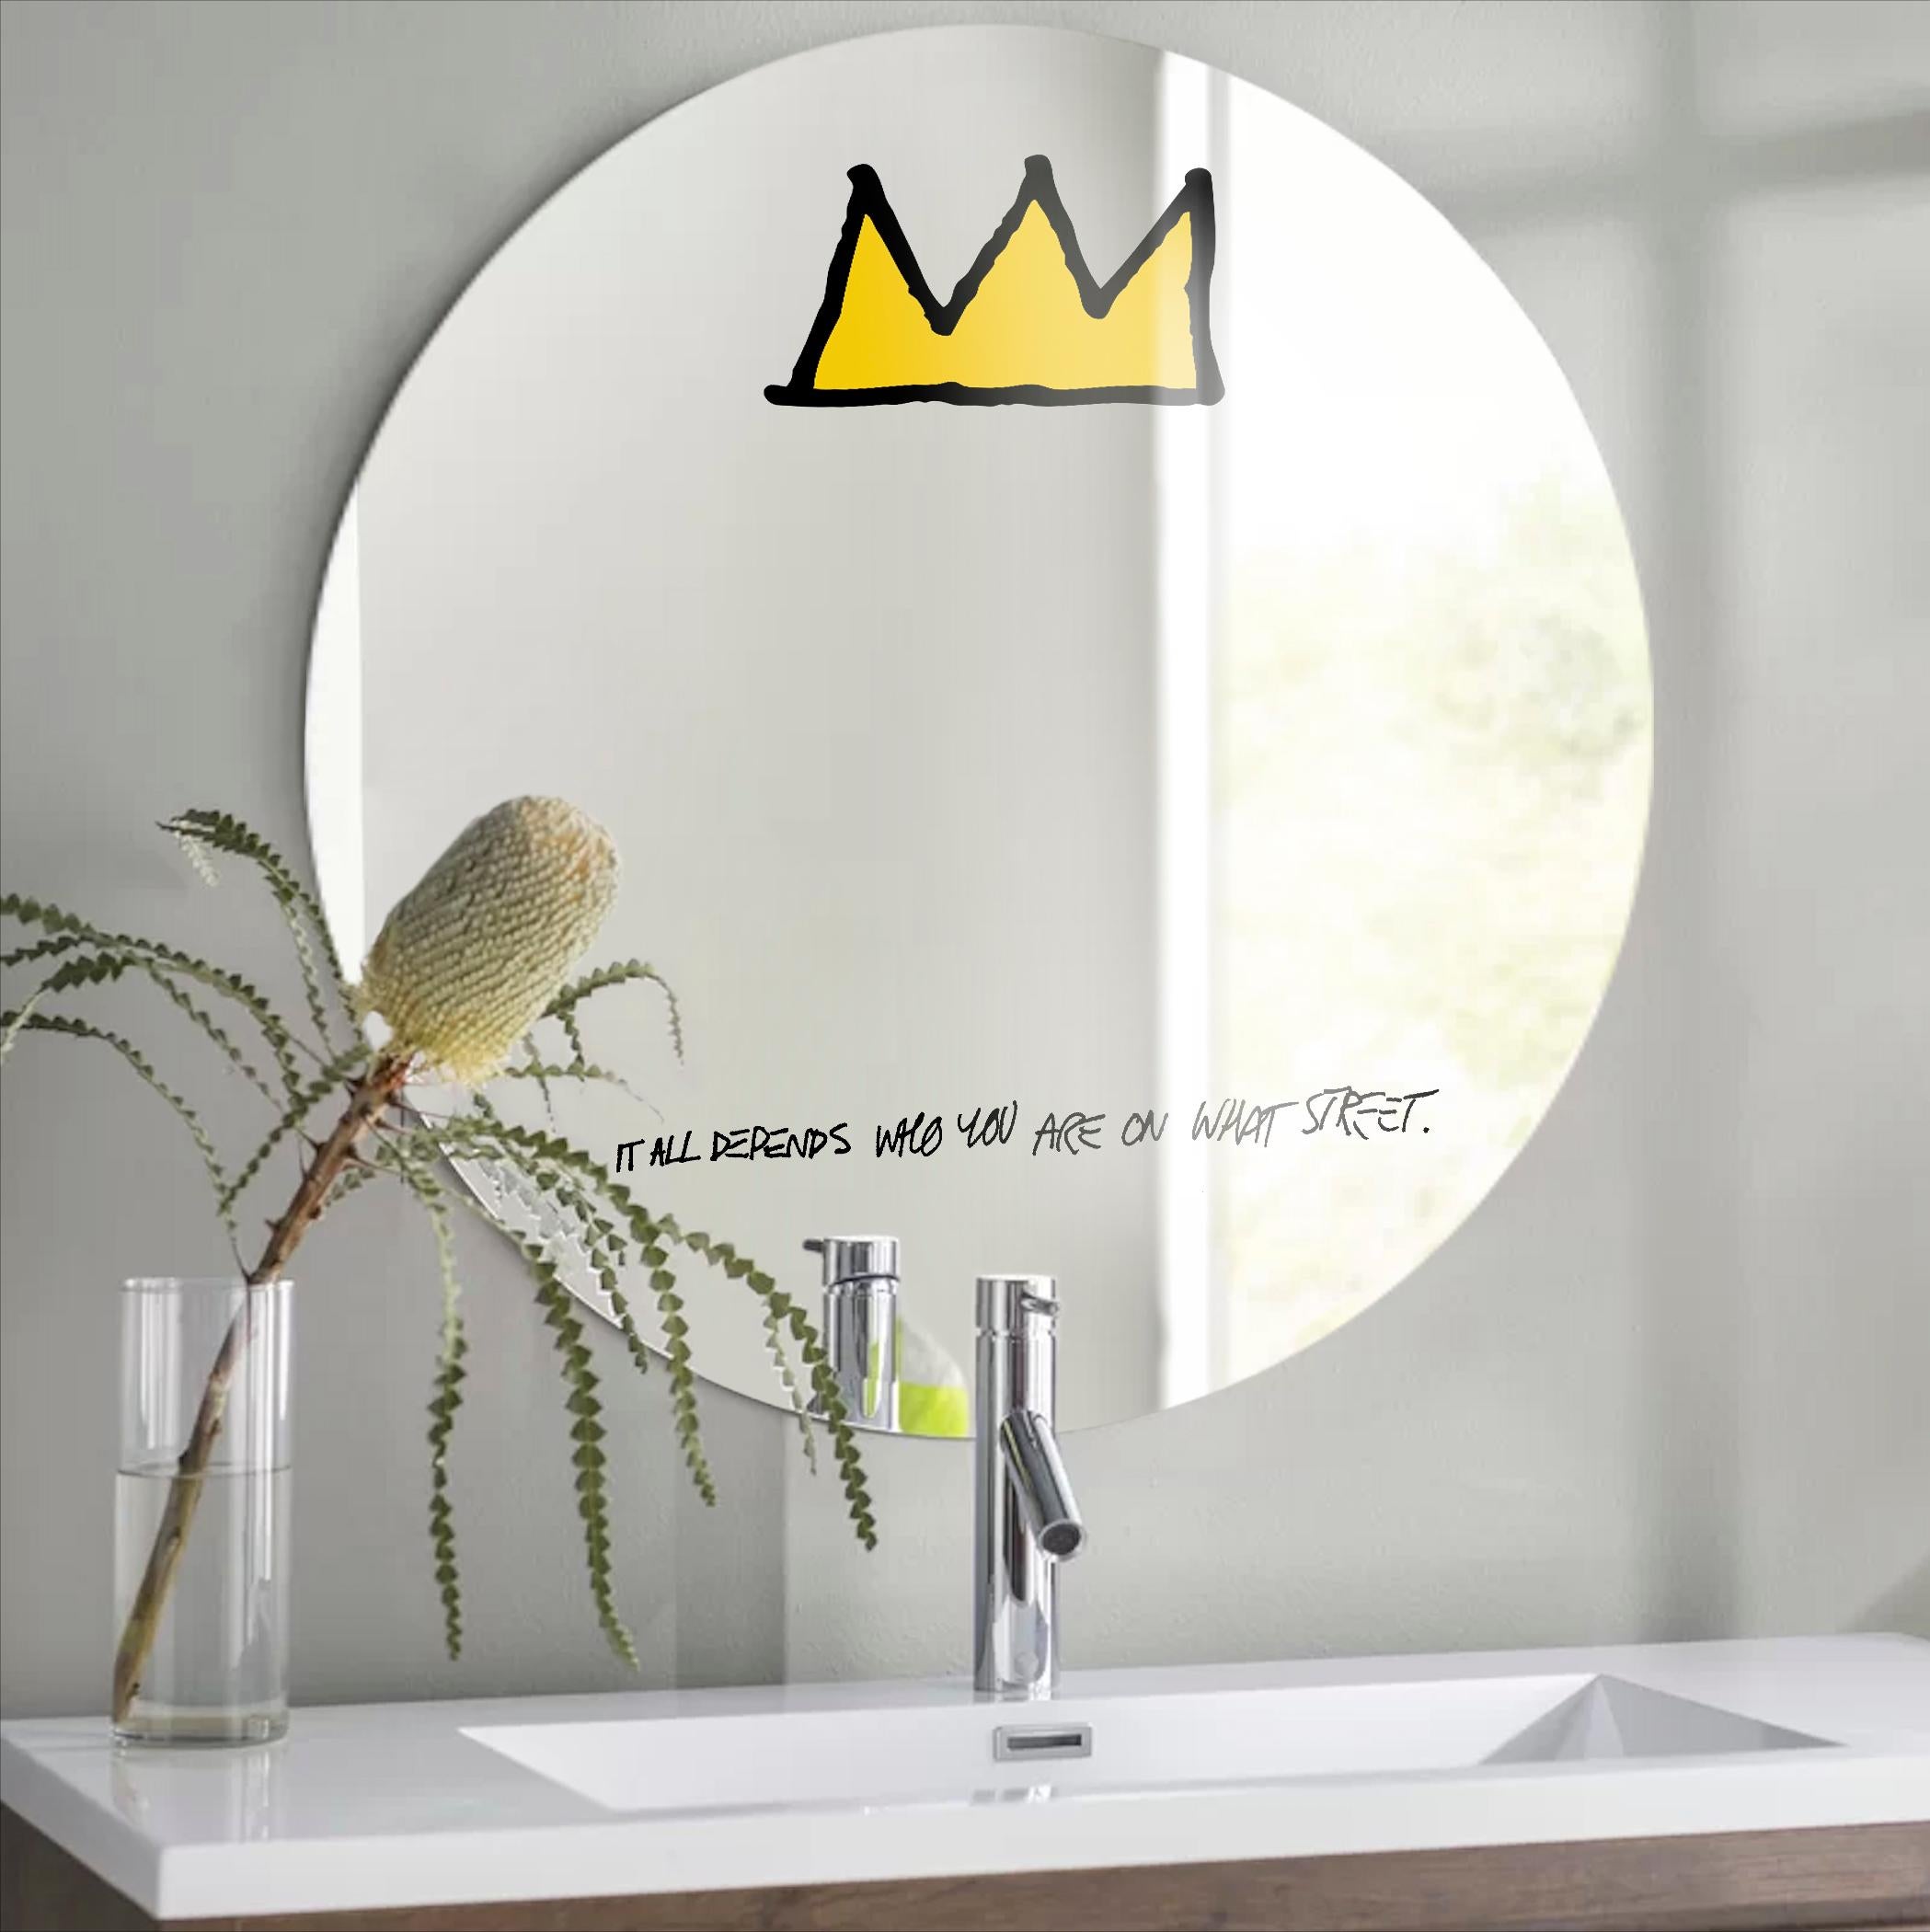 Glass and mirror with film interlay and polished edges
includes wooden mounting bracket
zippered storage pouch
open edition

© Estate of Jean-Michel Basquiat
Licensed by Artestar, New York

Find your swagger and coronate yourself with the